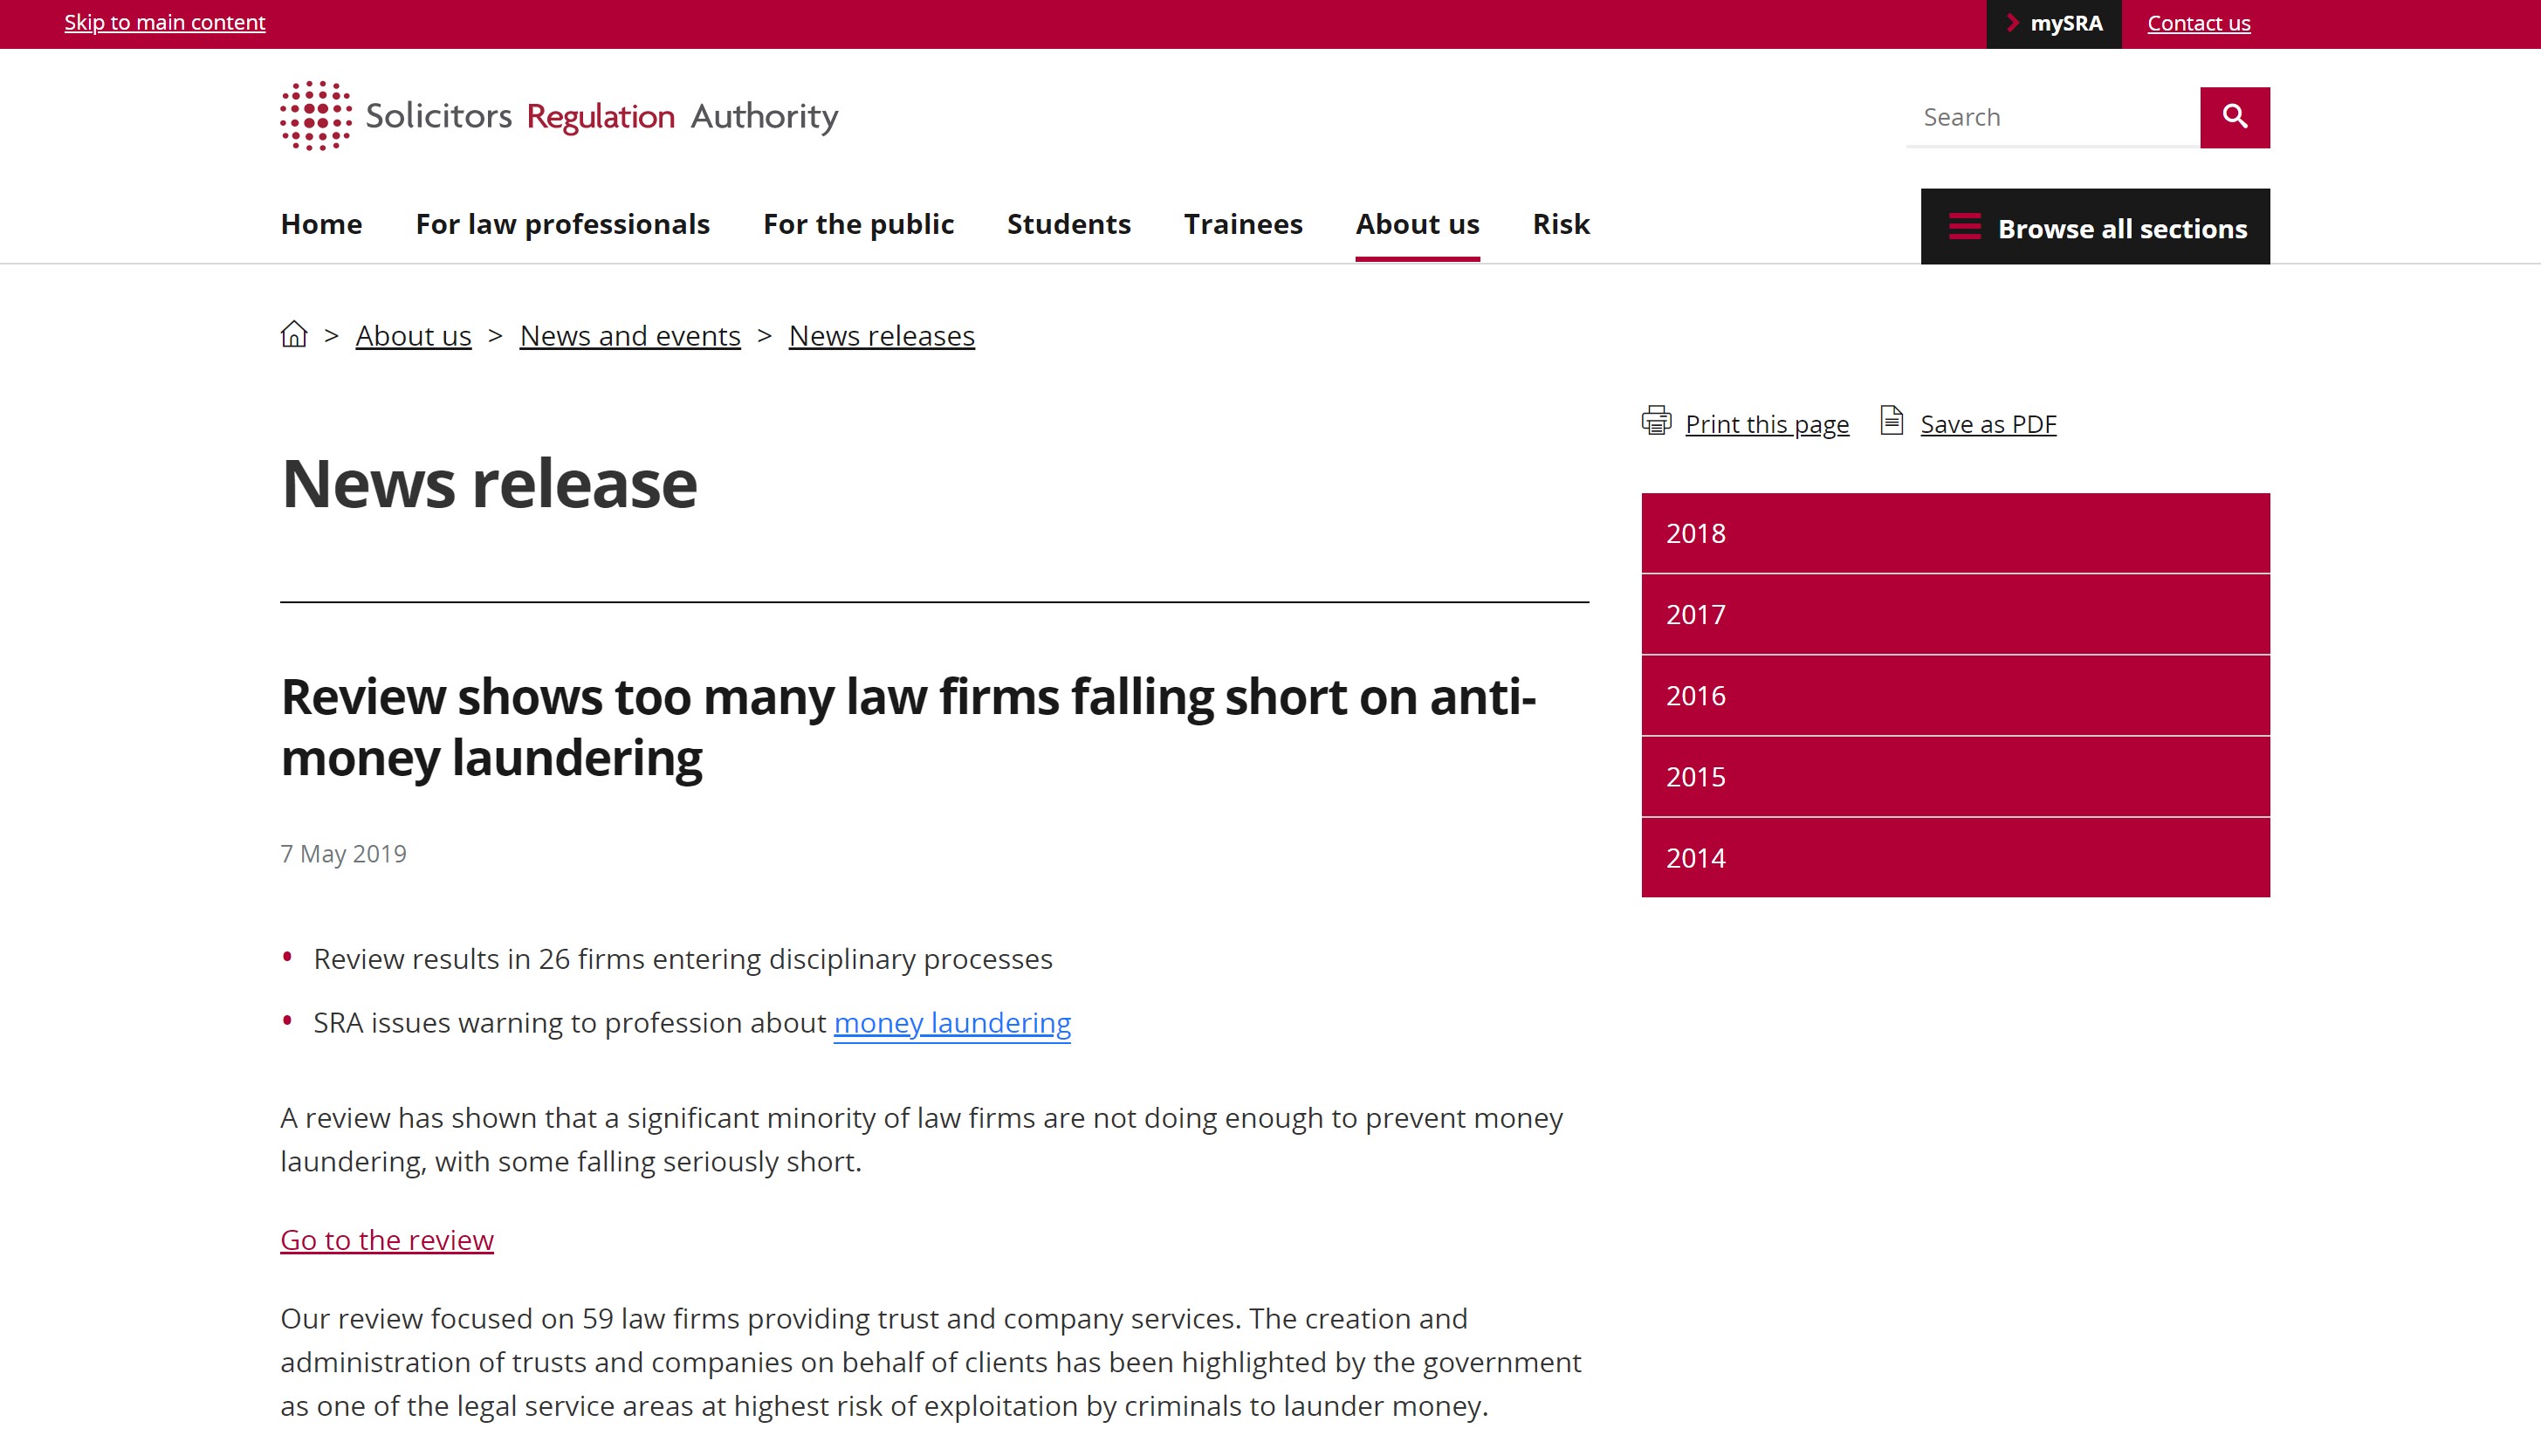 44 Of Uk Solicitors Tested Are Not Meeting Ml Tf Regulatory